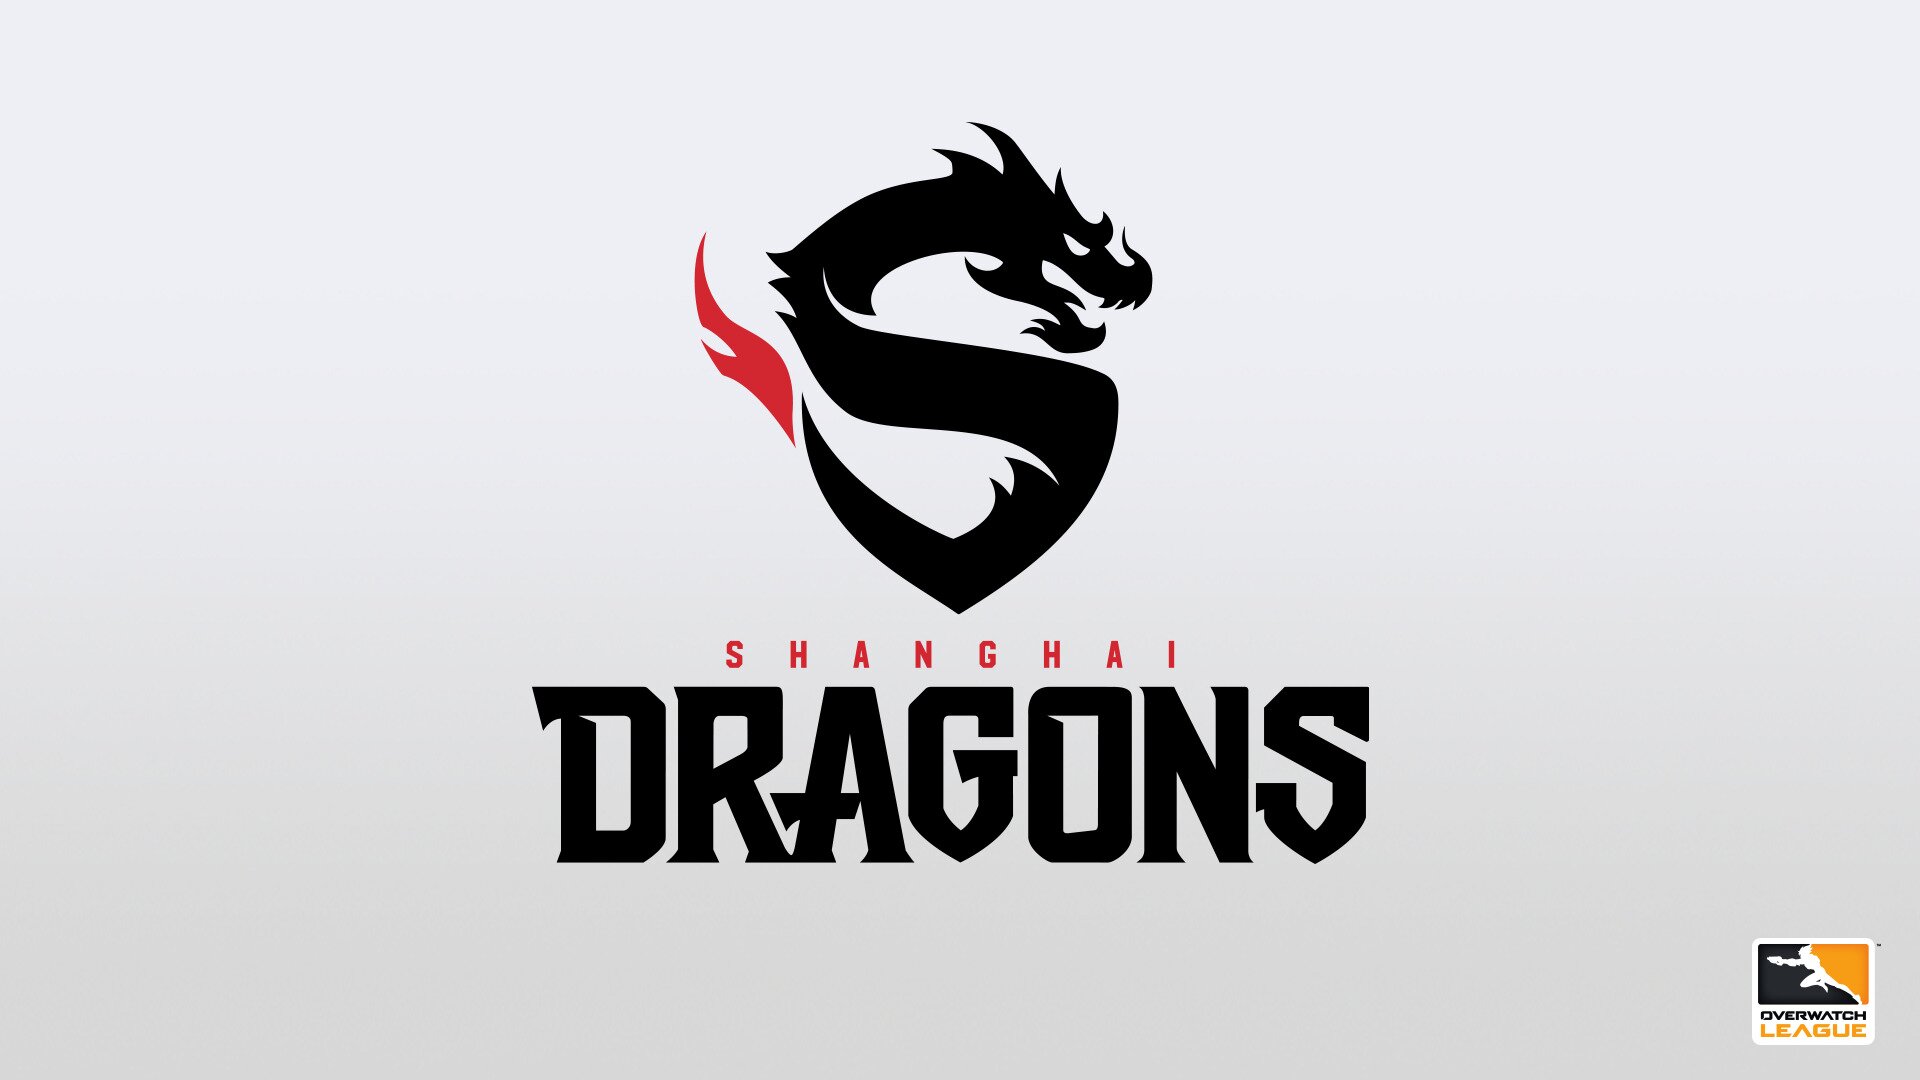 Lee “Fearless” Eui-Seok, who is known for his Winston play, will not be with the Dragons open the season due to health reasons.